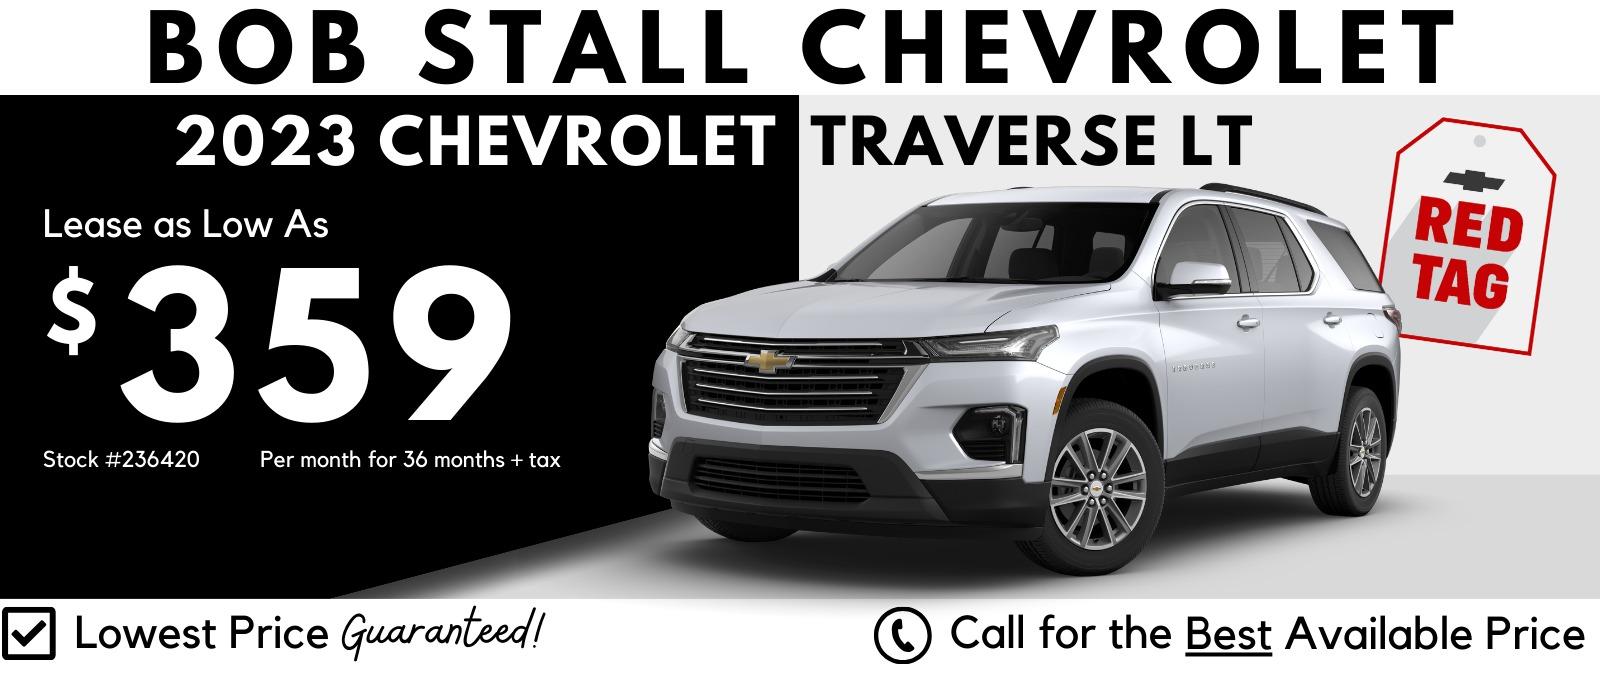 Traverse 2023 Savings - Lease as low as $359 per month for 36 Months